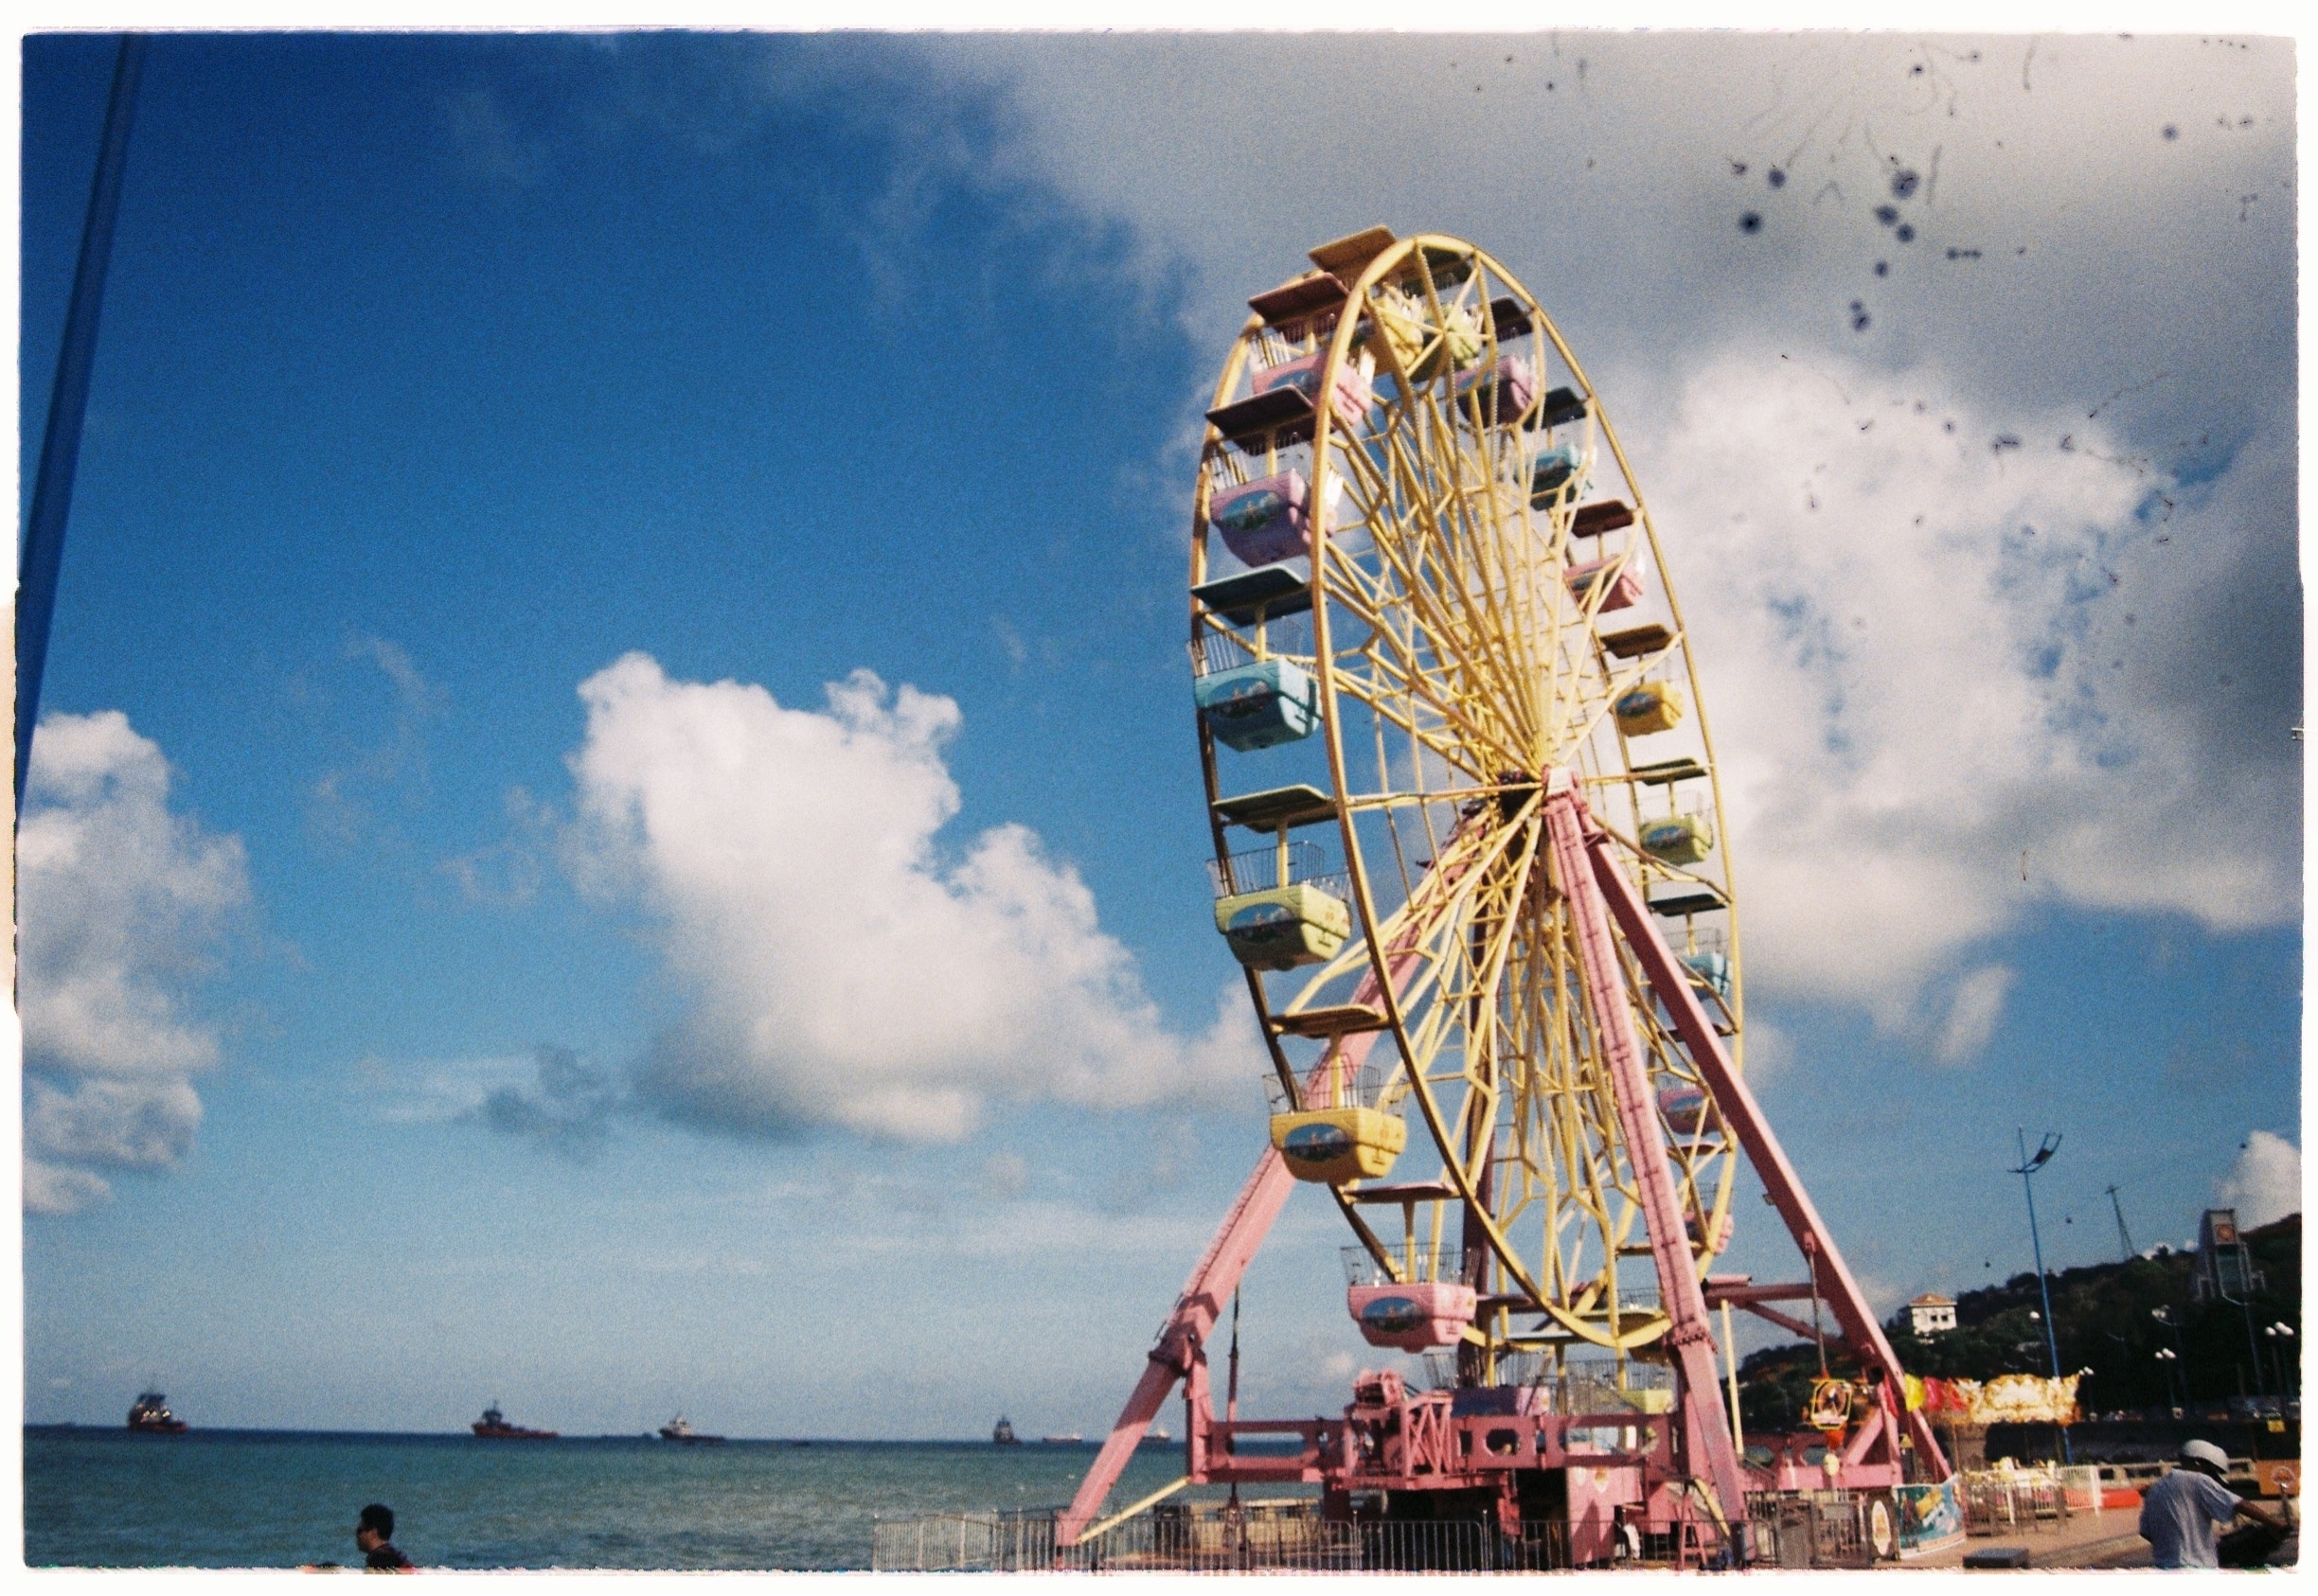 On your way from the city center to the front beach (bãi trước) will you encounter this attraction. A Ferris wheel right on the seashore from which one can view both the city and the ocean from above - just what could be cooler?